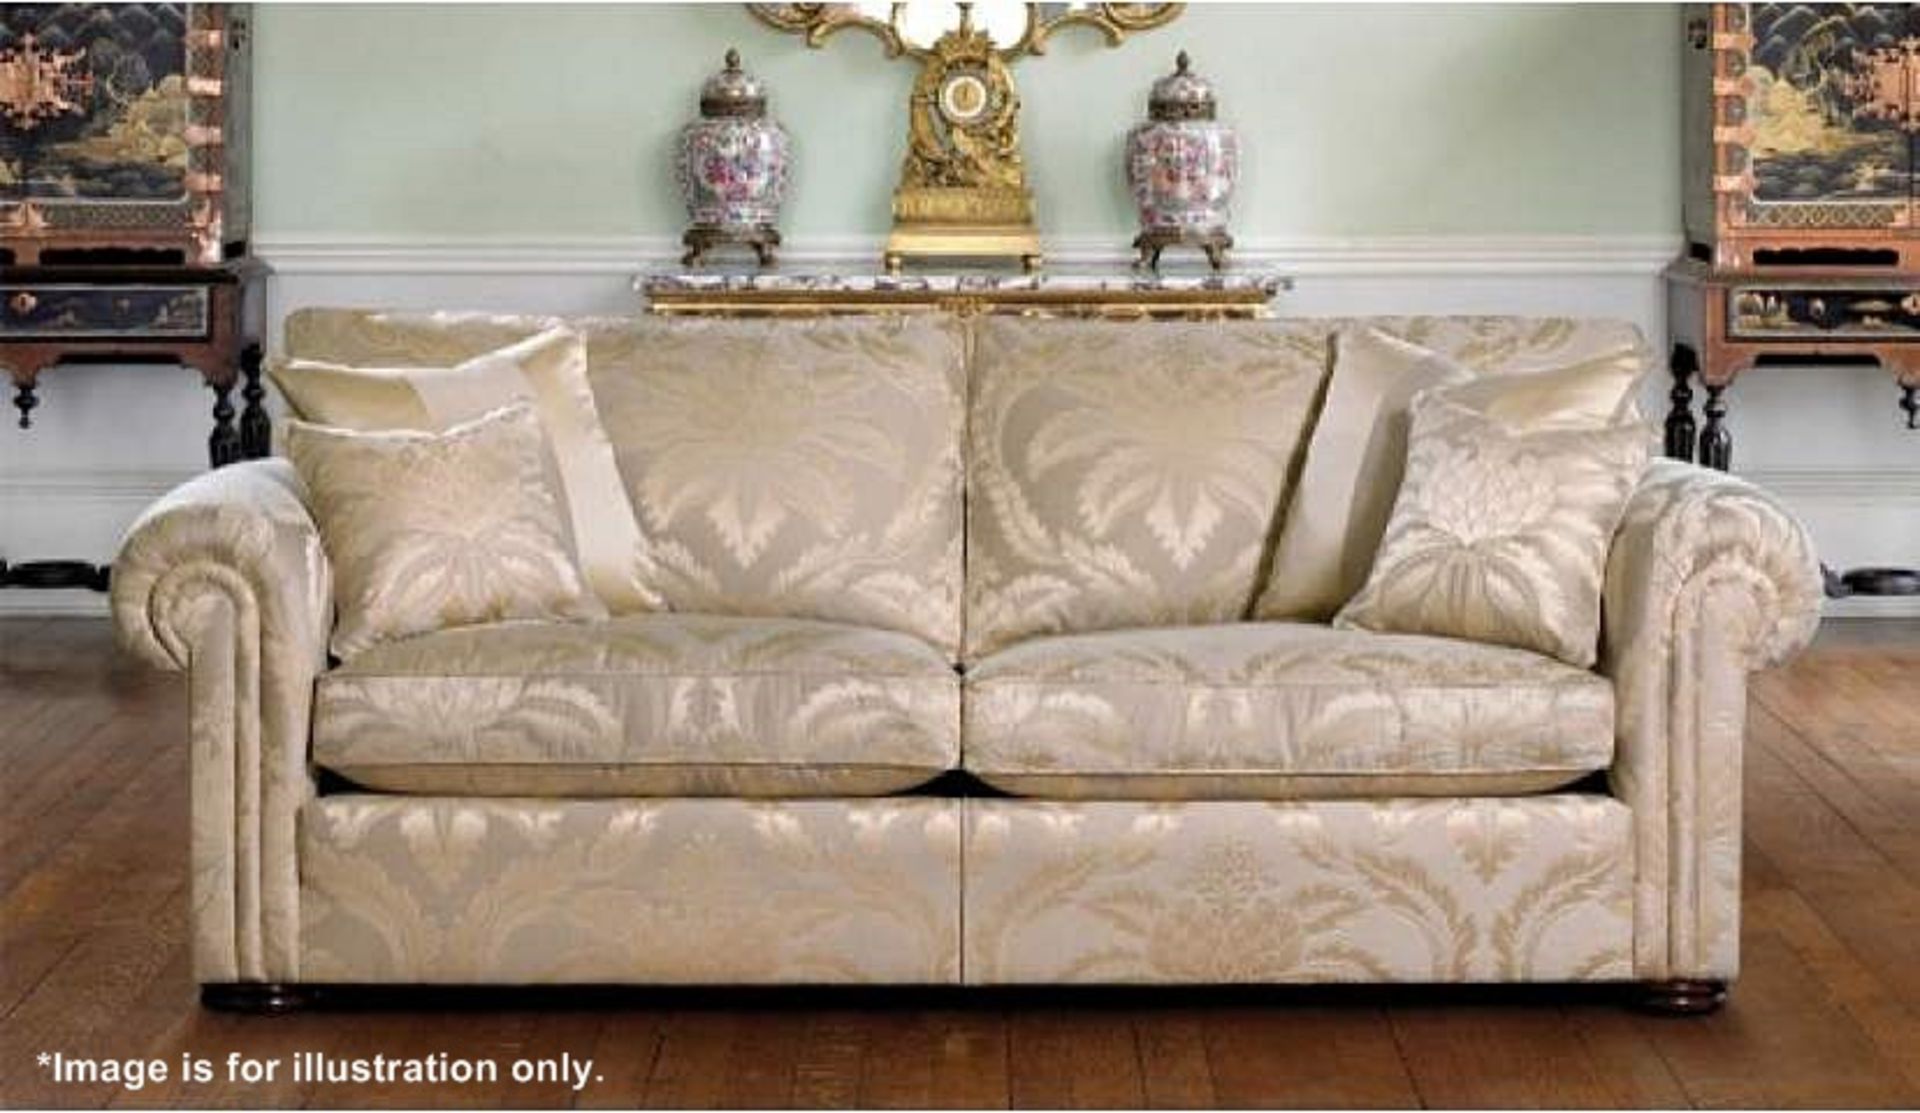 1 x DURESTA Waldorf Zephyr Sofabed With Mattress - Stunning Example In Excellent Condition - Fully